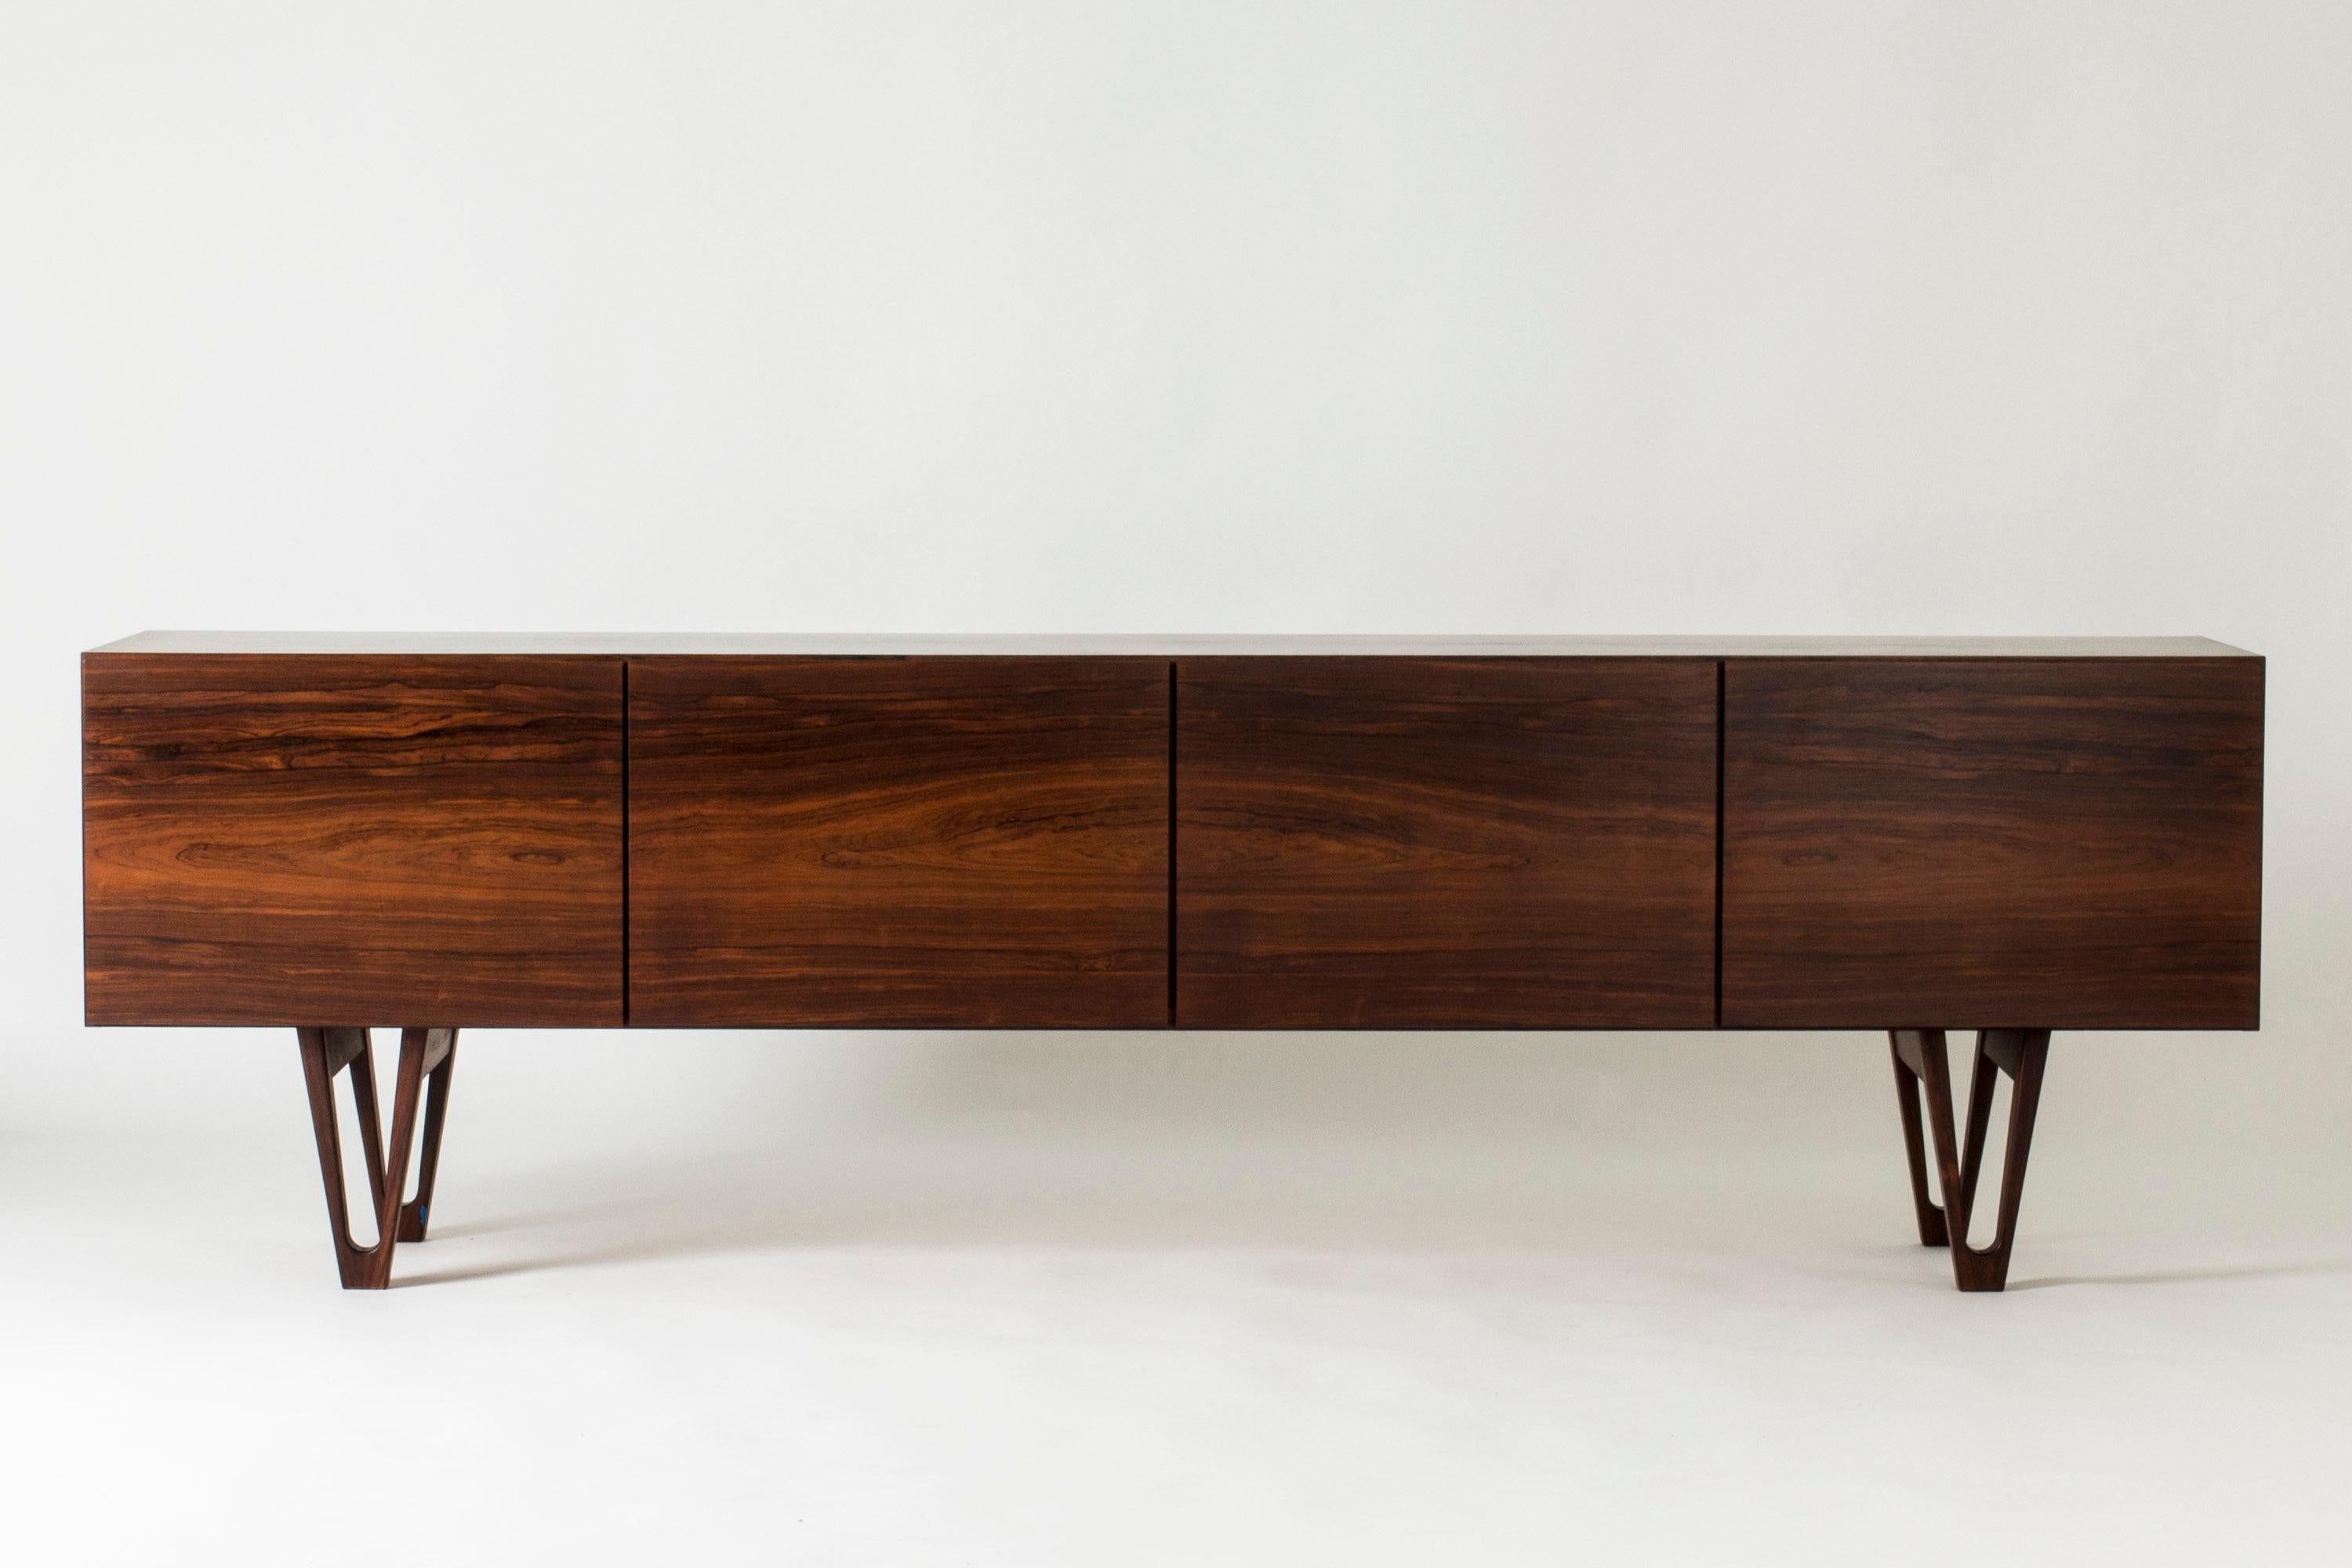 Stunning rosewood sideboard by Ib Kofod Larsen for the Swedish firm Seffle Möbelfabrik. Low design that gives the impression that the sideboard is extra long. Beautifully sculpted legs and carefully hollowed out discreet handles. White drawers